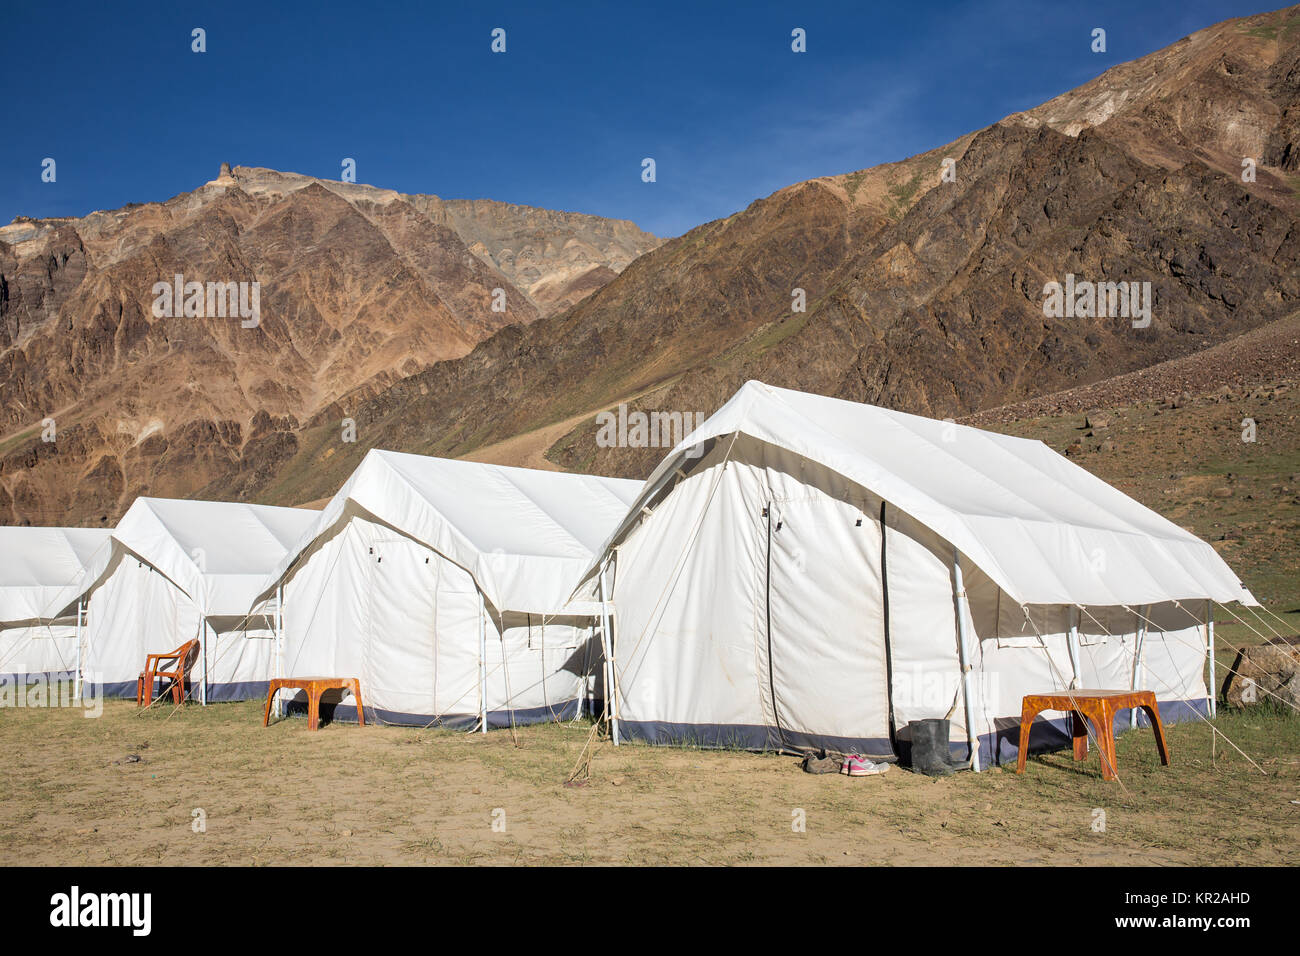 Sarchu camping tents at the Leh - Manali Highway in Ladakh region, Northern India. Stock Photo